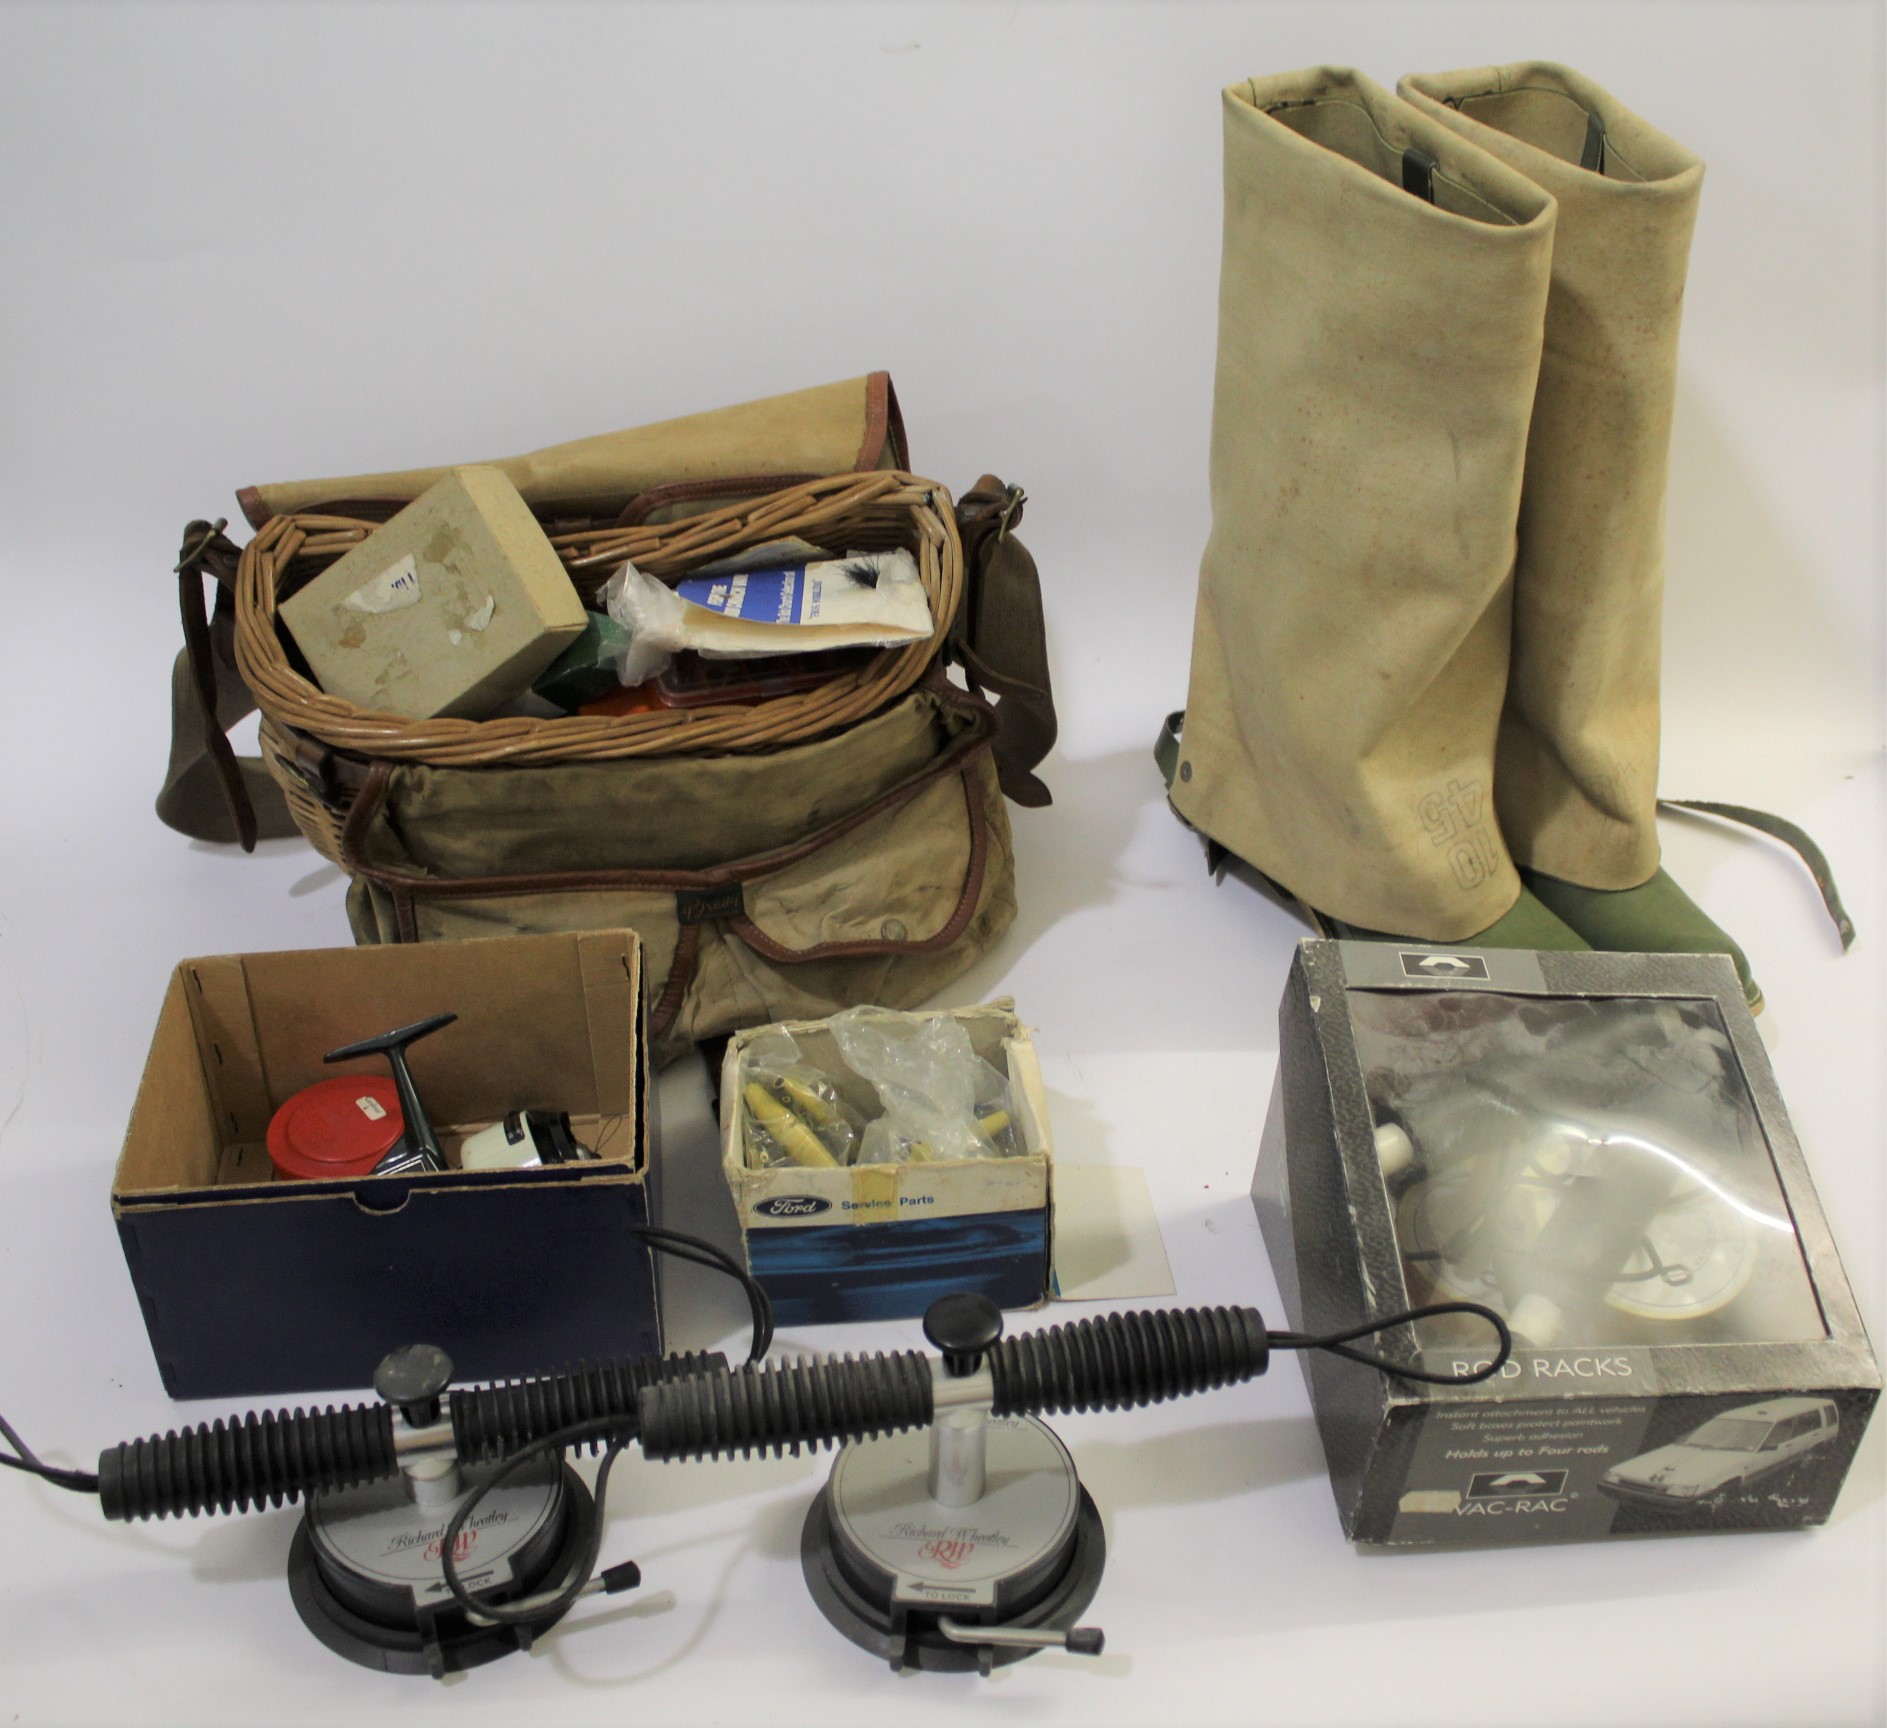 FISHING ACCESSORIES including a pair of waders (size 10), a wicker and canvas fishing basket